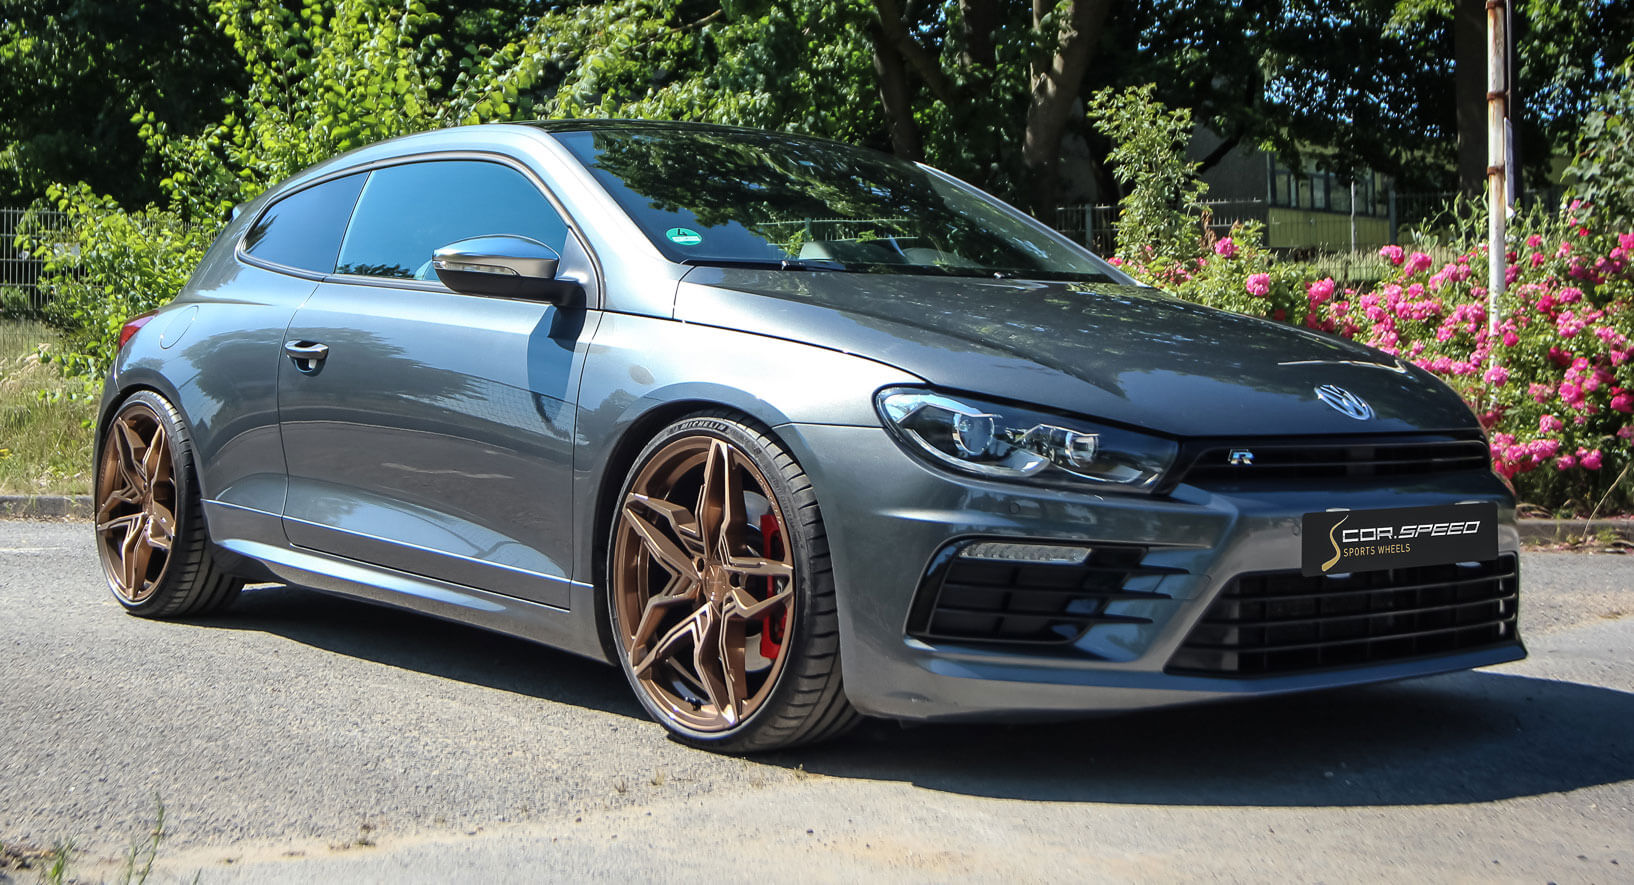 Volkswagen Scirocco R Heads To Cor.Speed, Emerges With